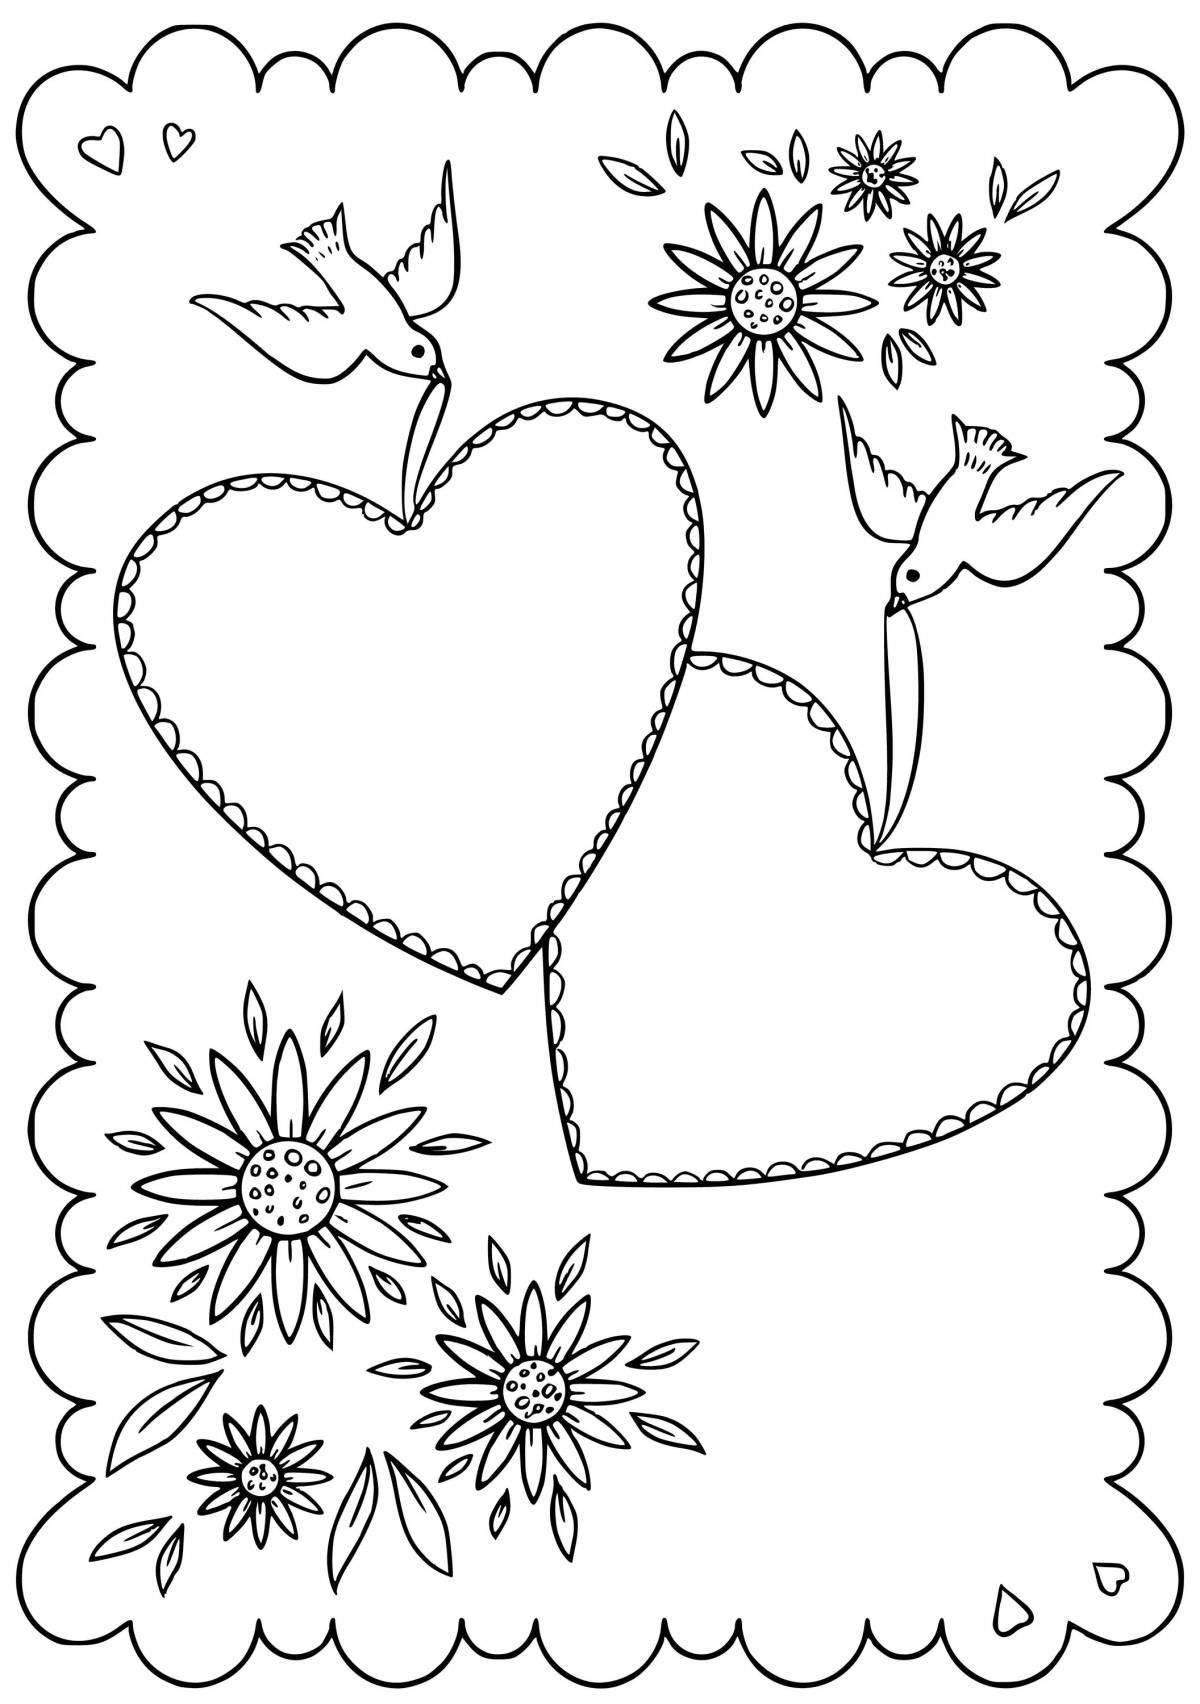 Coloring valentines for kids